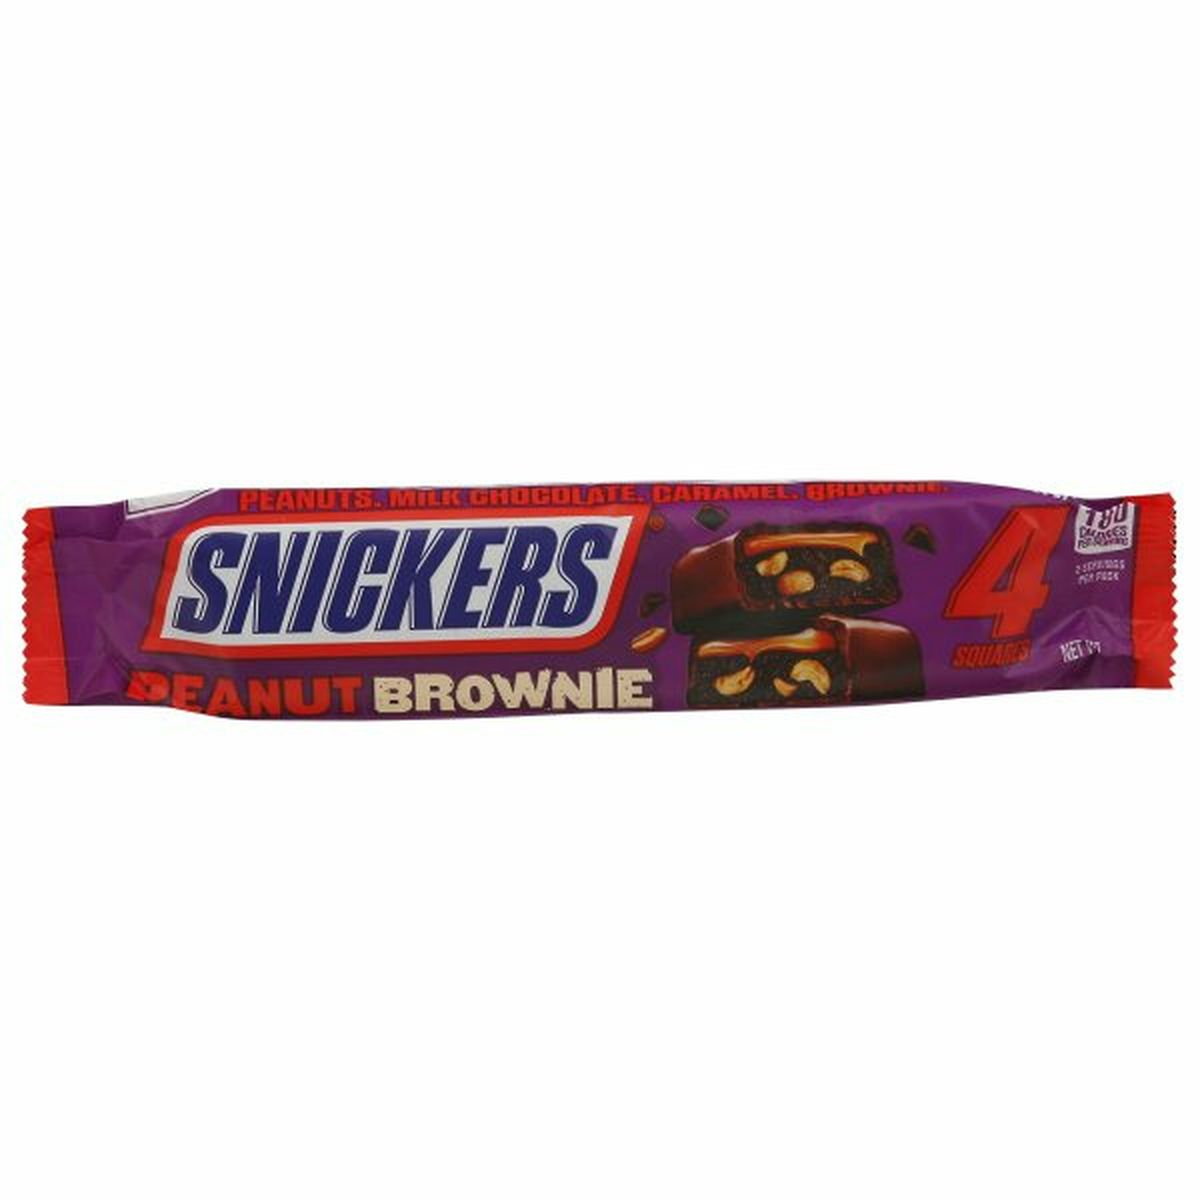 Calories in Snickers Squares, Peanut Brownie